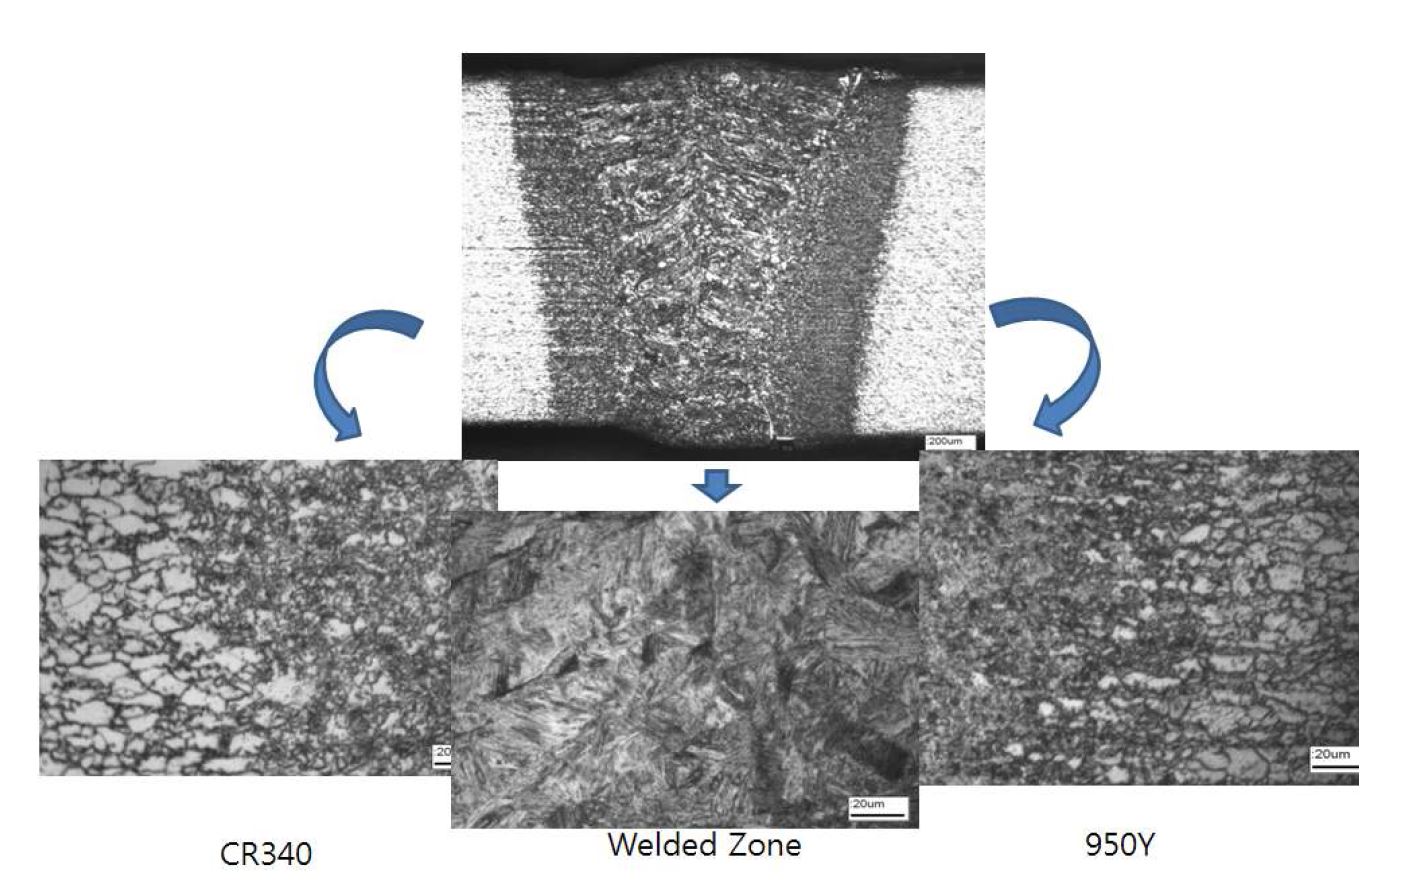 The Microstructures of TWB between CR340 and 950Y